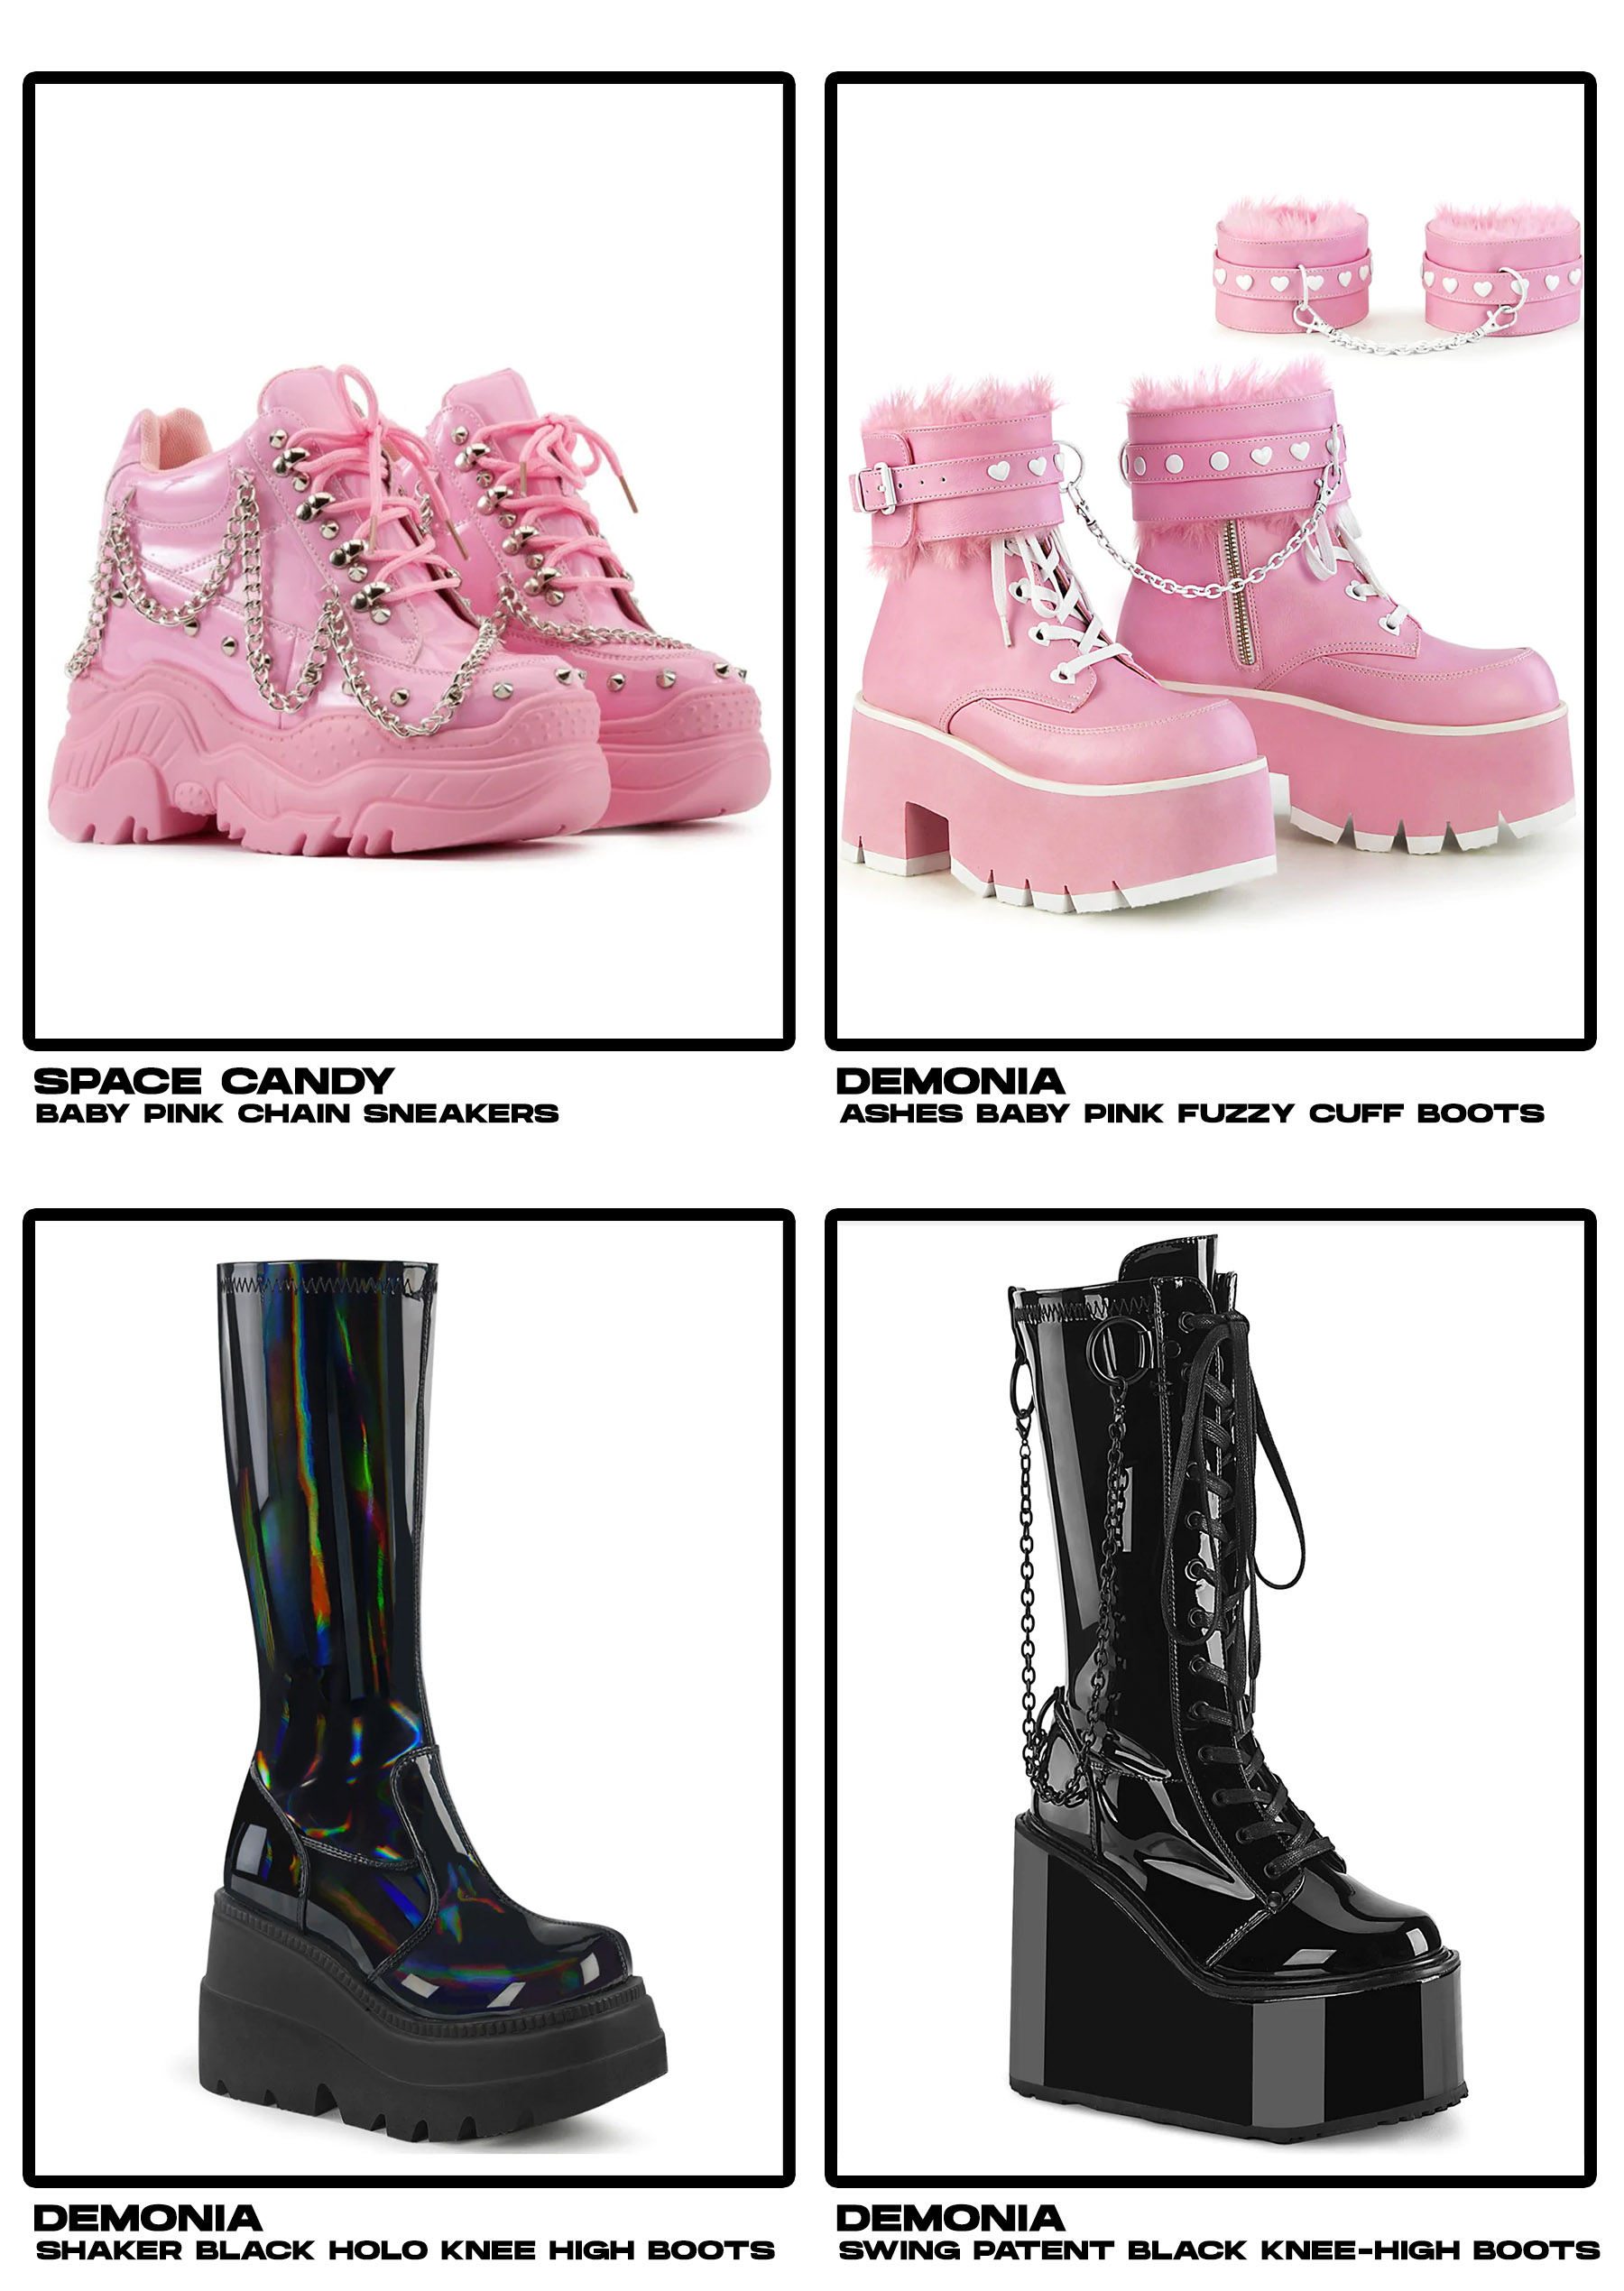  SPACE CANDY DEMONIA BABY PINK CHAIN SNEAKERS ASHES BABY PINK FUZZY CUFF BOOTS DEMONIA DEMONIA SHAKER BLACK HOLO KNEE HIGH BOOTS SWING PATENT BLACK KNEE-HIGH BOOTS 